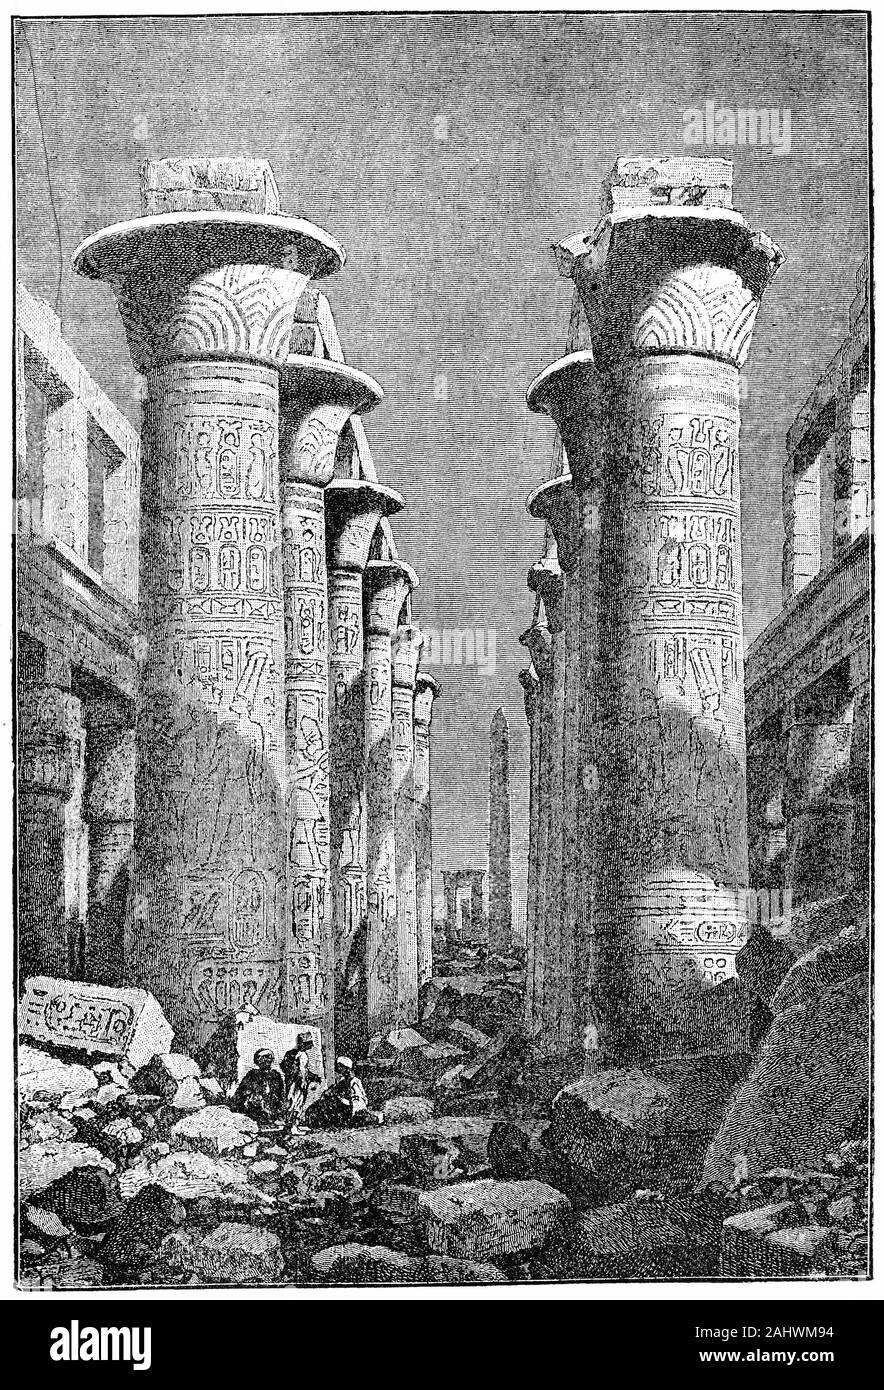 Engraving of columns in The Karnak Temple Complex, commonly known as Karnak, a vast mix of decayed temples, chapels, pylons, and other buildings near Luxor, in Egypt. Construction at the complex began during the reign of Senusret I in the Middle Kingdom and continued into the Ptolemaic period, although most of the extant buildings date from the New Kingdom. Stock Photo